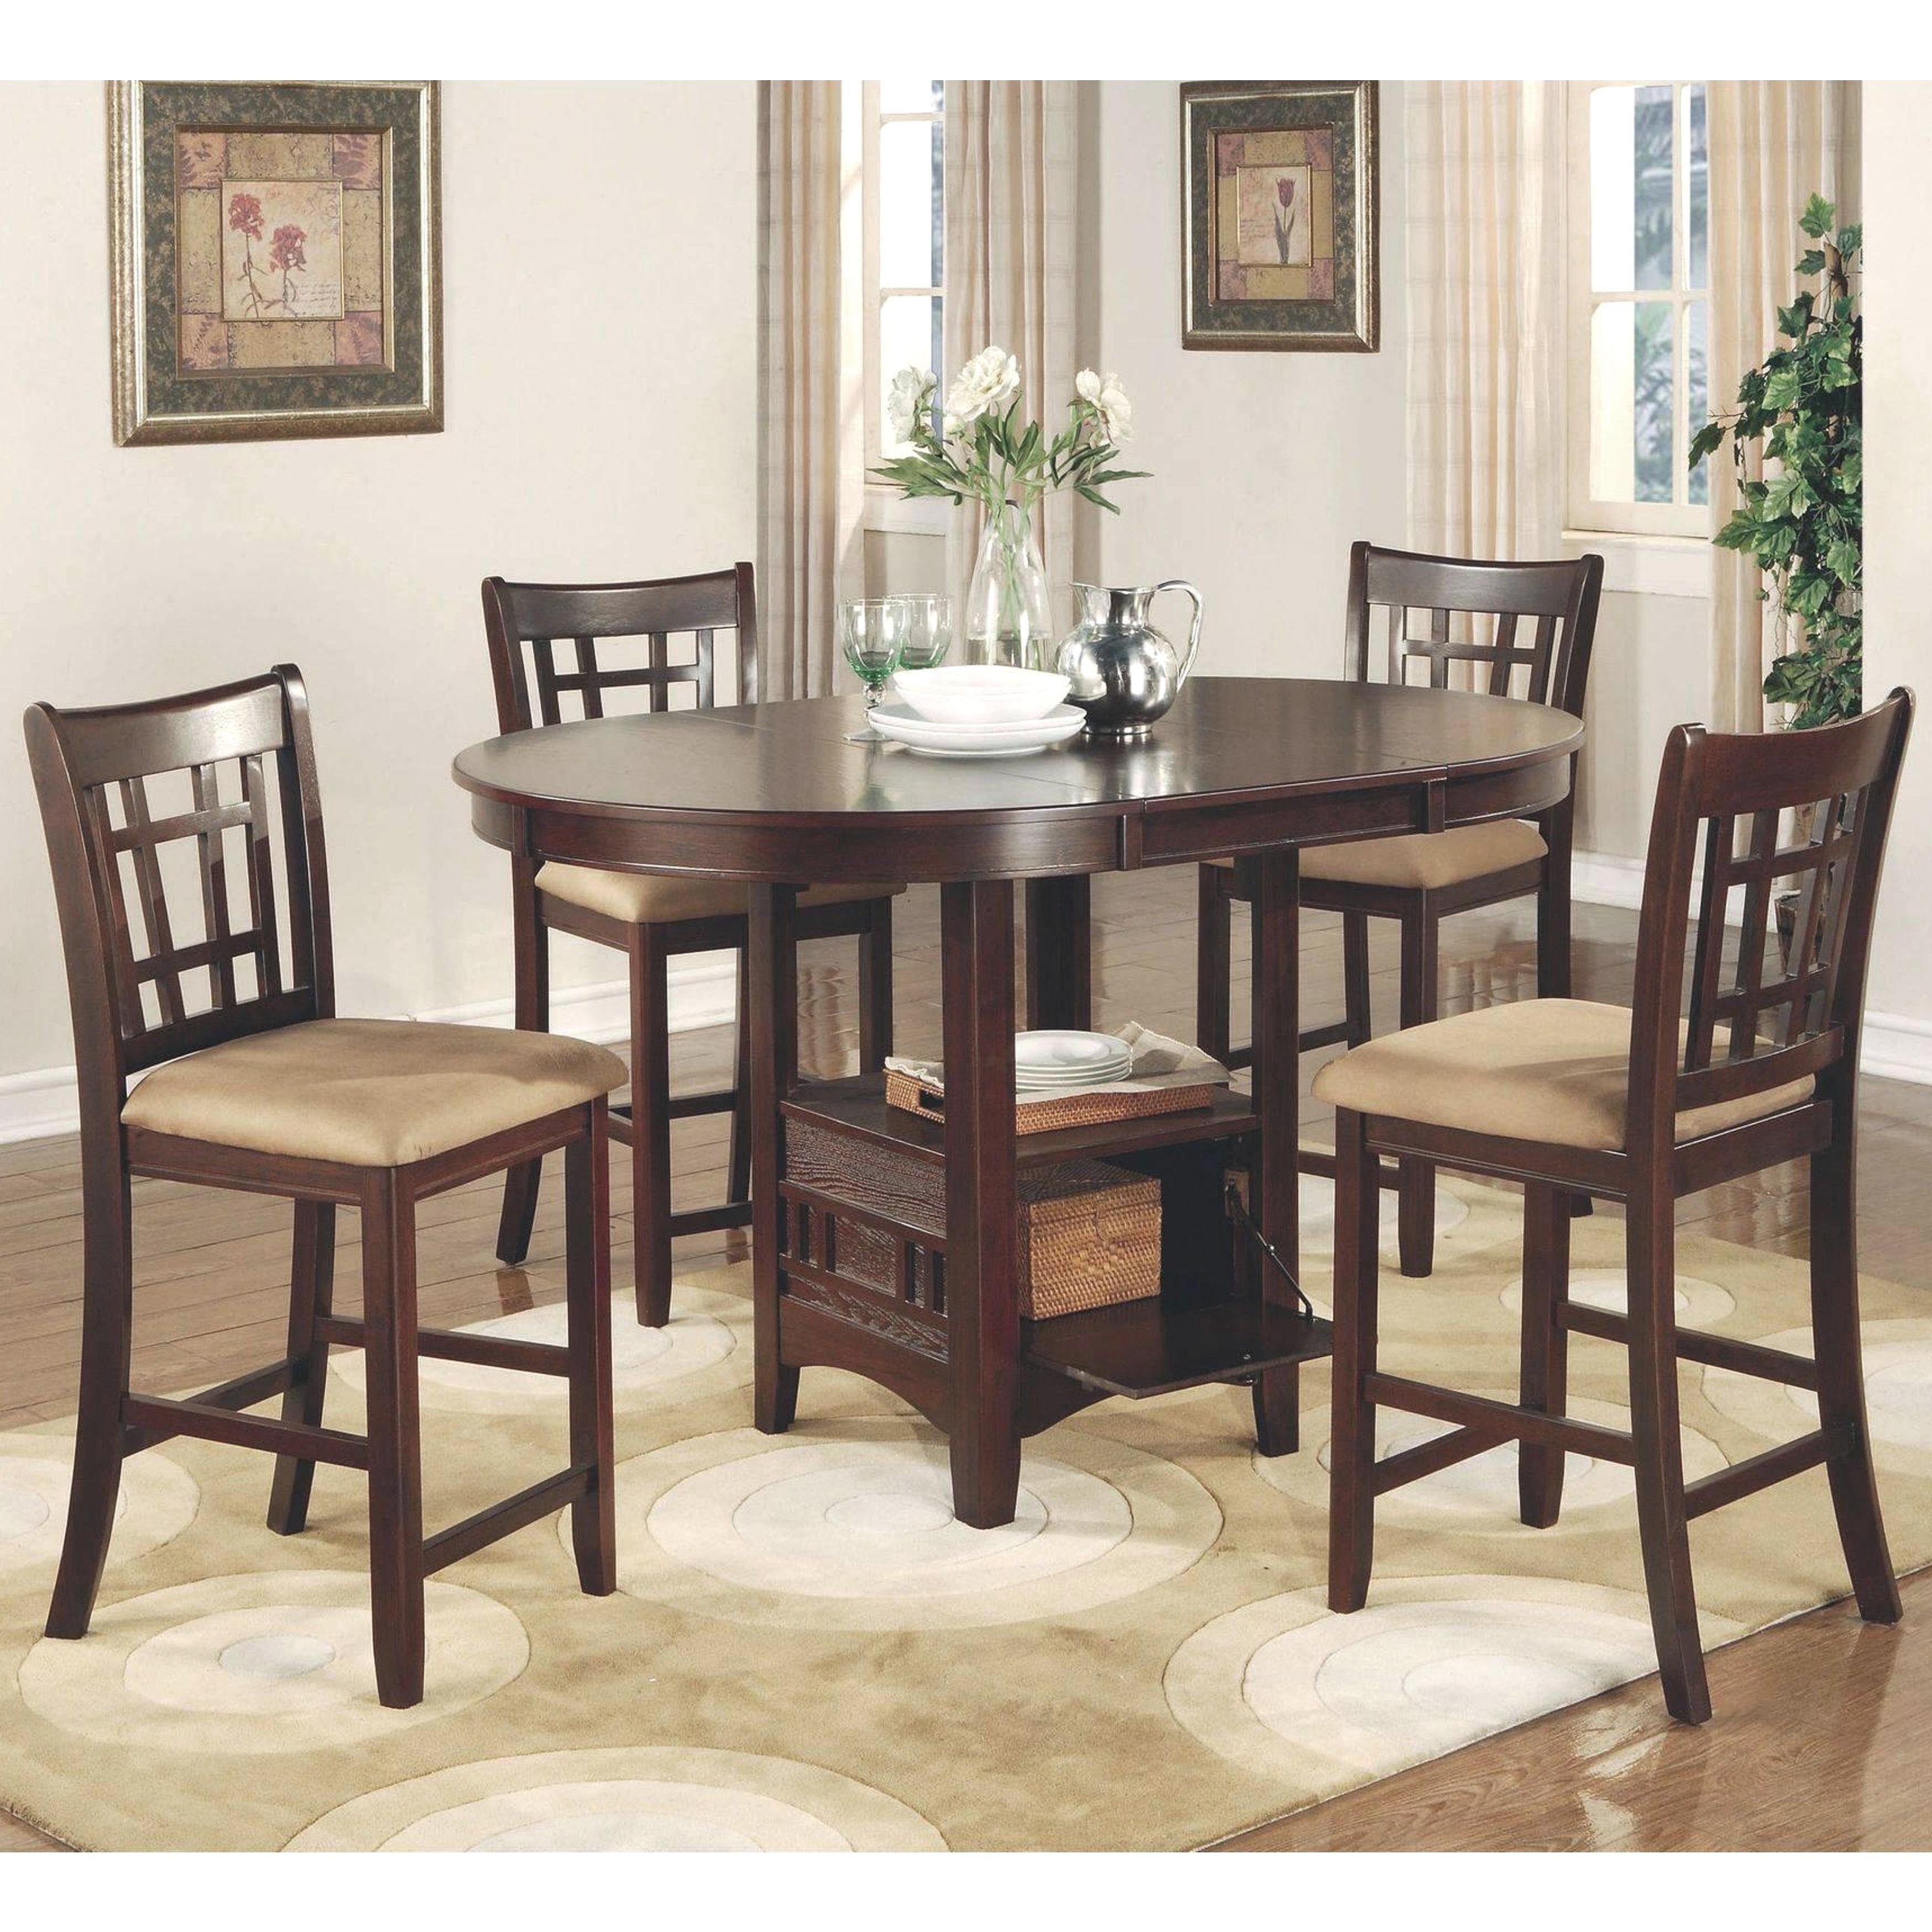 Most Popular Buy 5 Piece Sets, Counter Height Kitchen & Dining Room Sets Online For Goodman 5 Piece Solid Wood Dining Sets (set Of 5) (View 6 of 20)